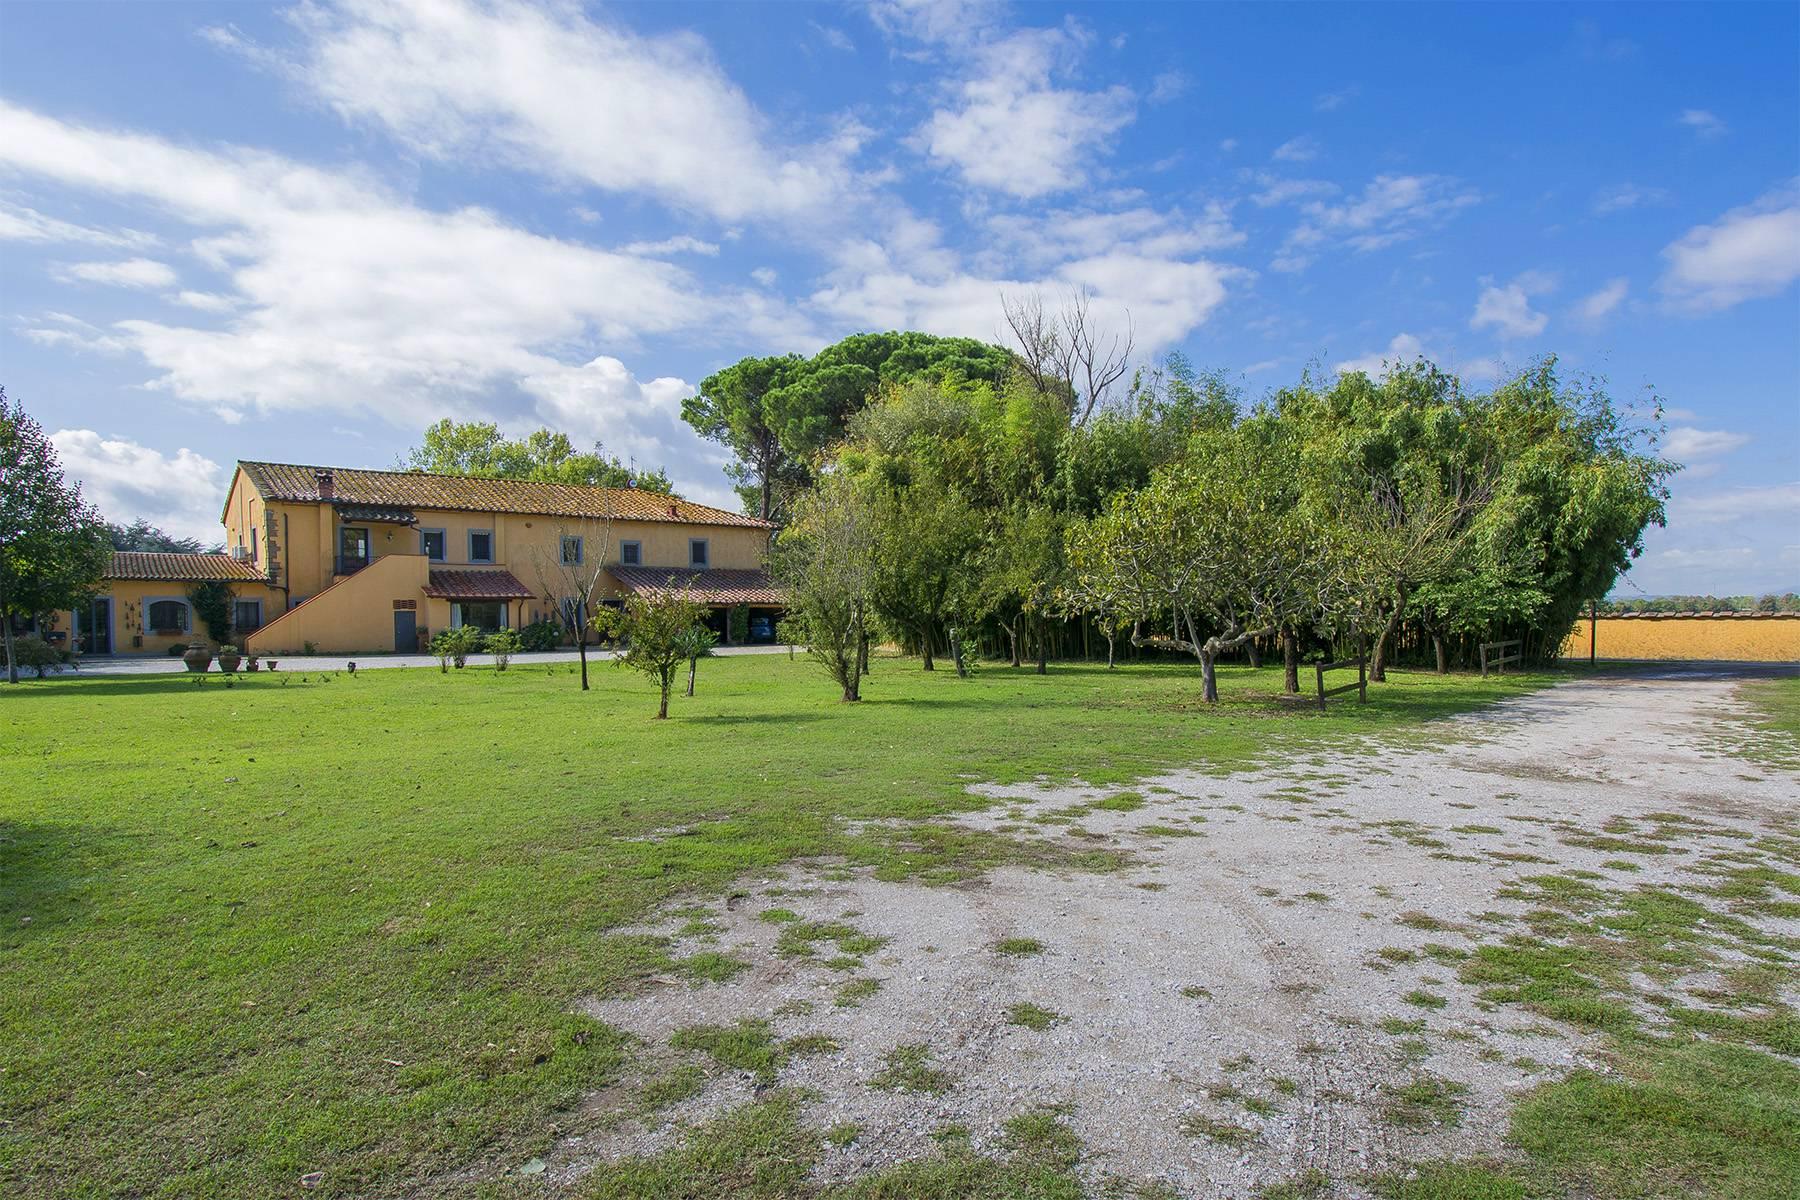 Equestrian farmhouse in the Tuscan countryside - 21